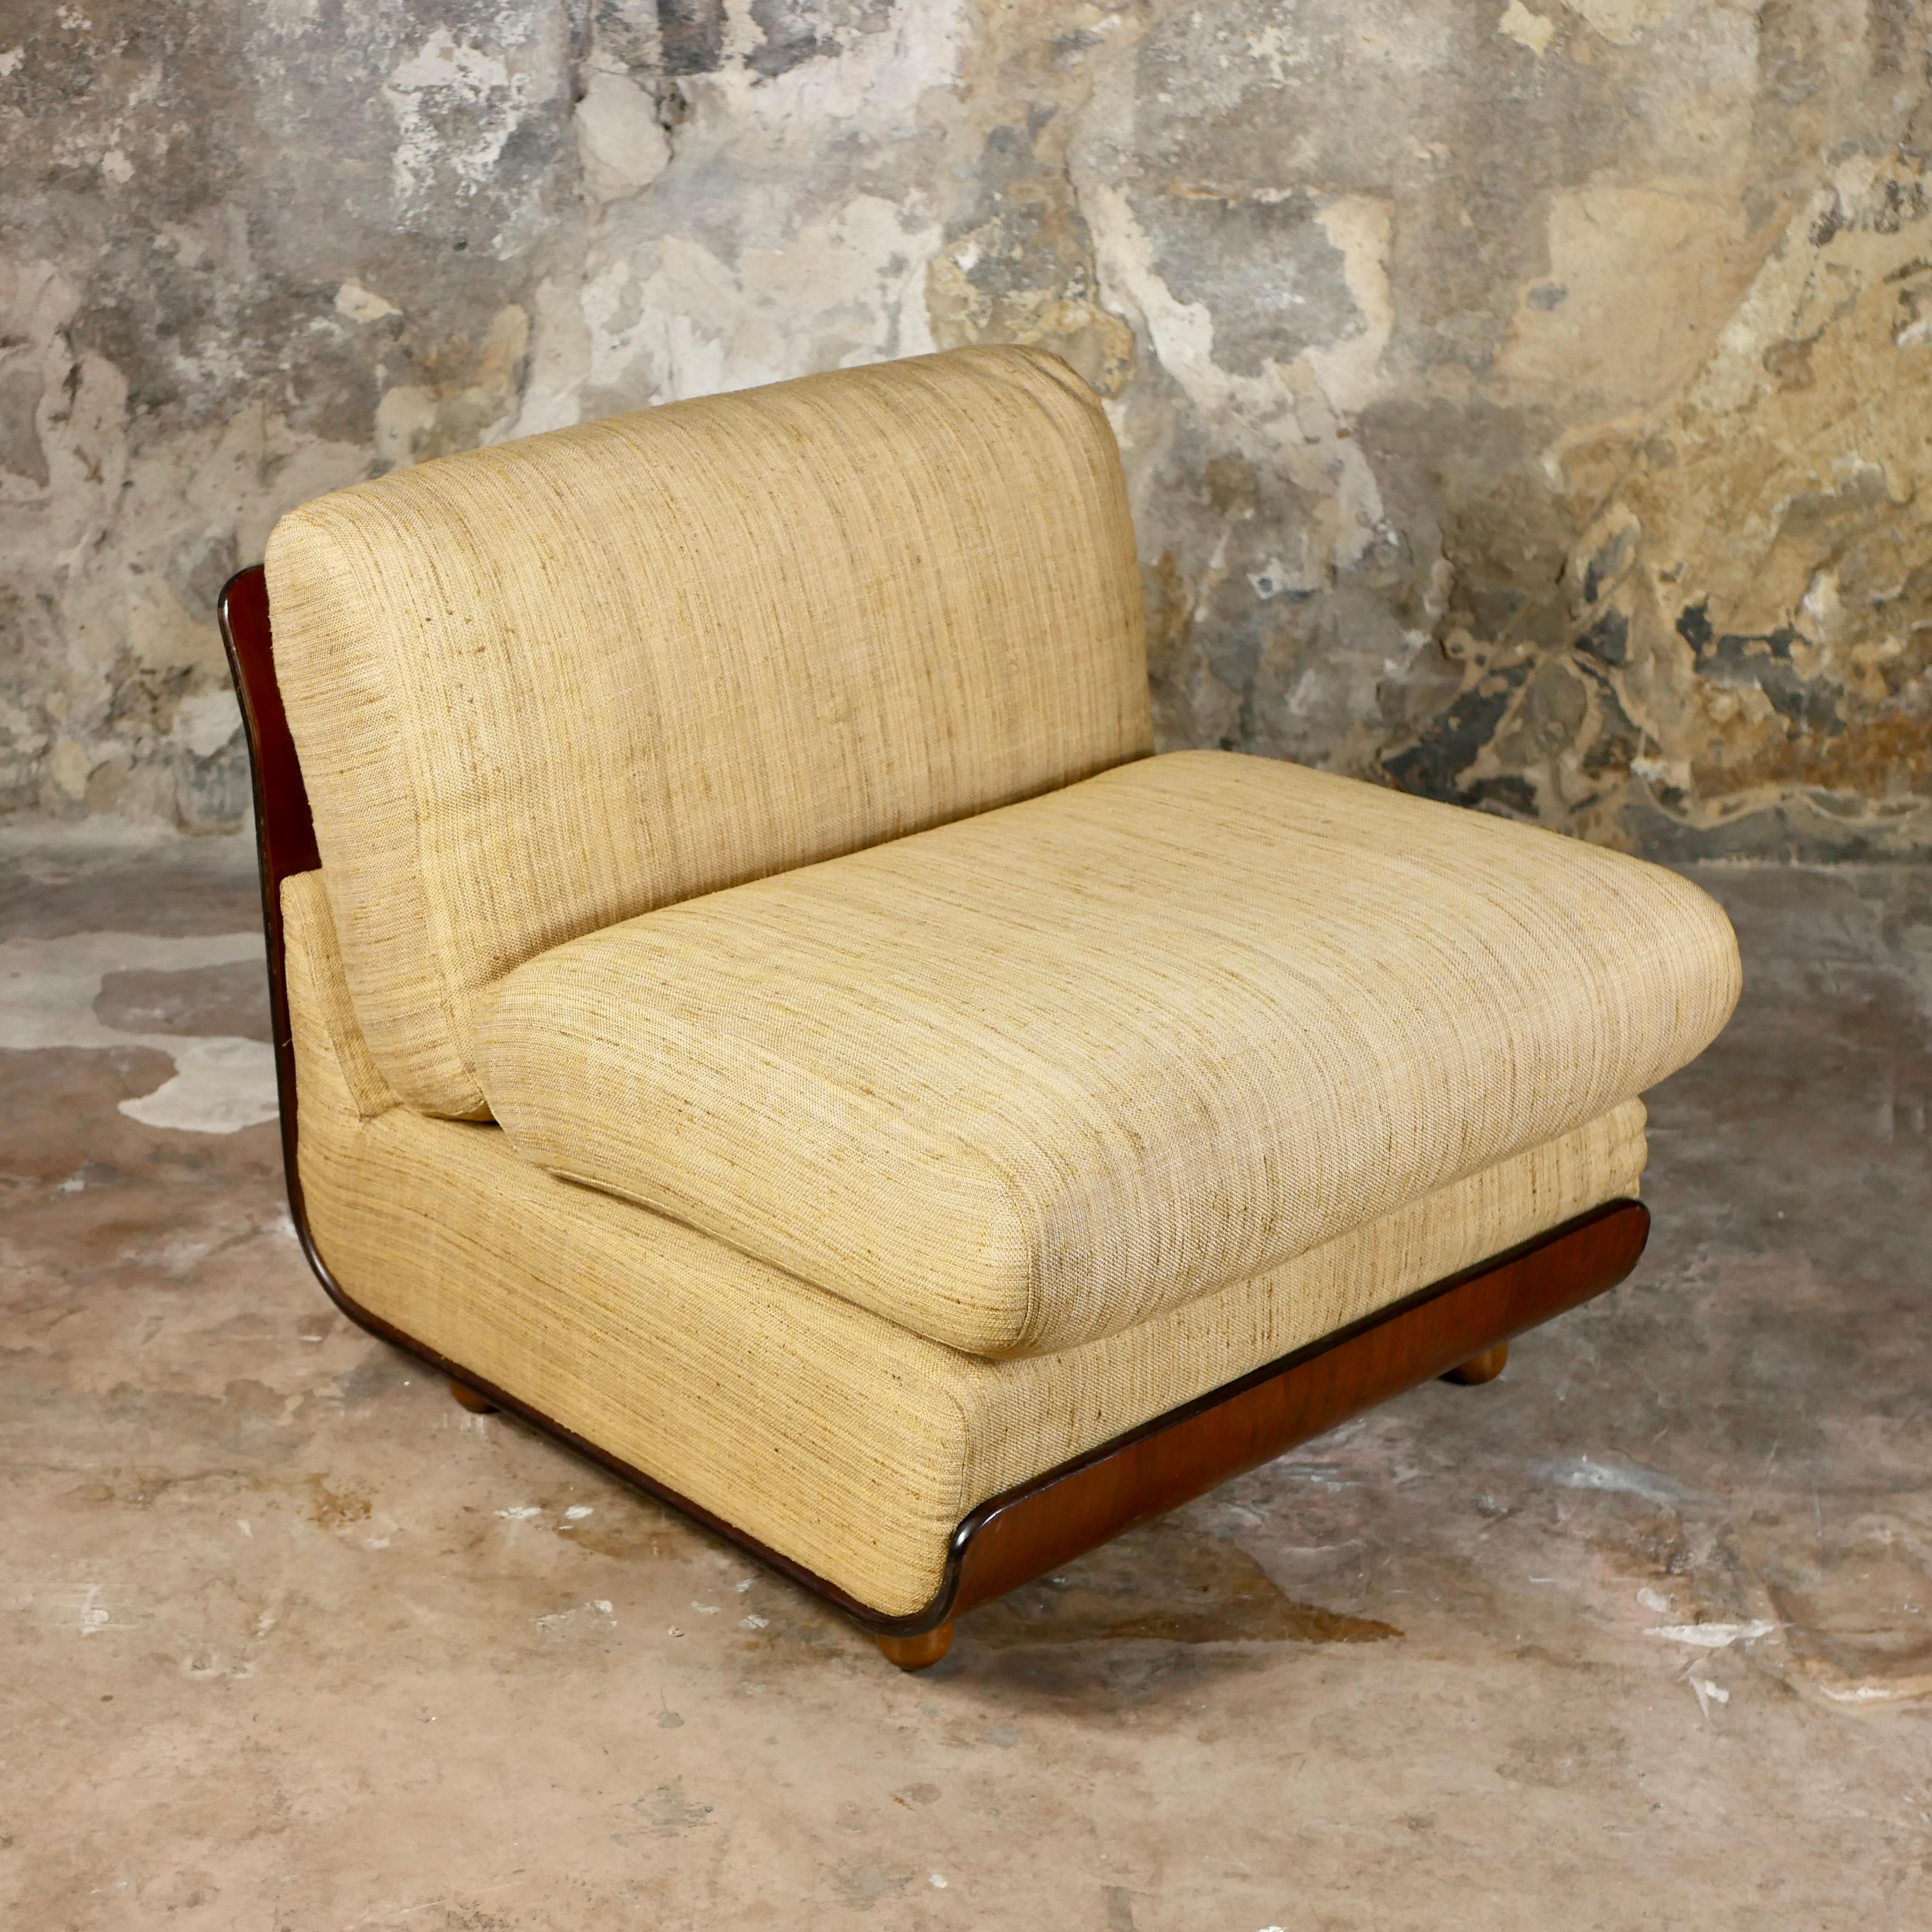 Beautiful italian armchair from the 1970s in the style of Mario Bellini’s Amanta, but more beautiful with its thermoformed wood structure and pale yellow original fabric.
Very good condition, few traces of time on wood and a tiny tear barely visible